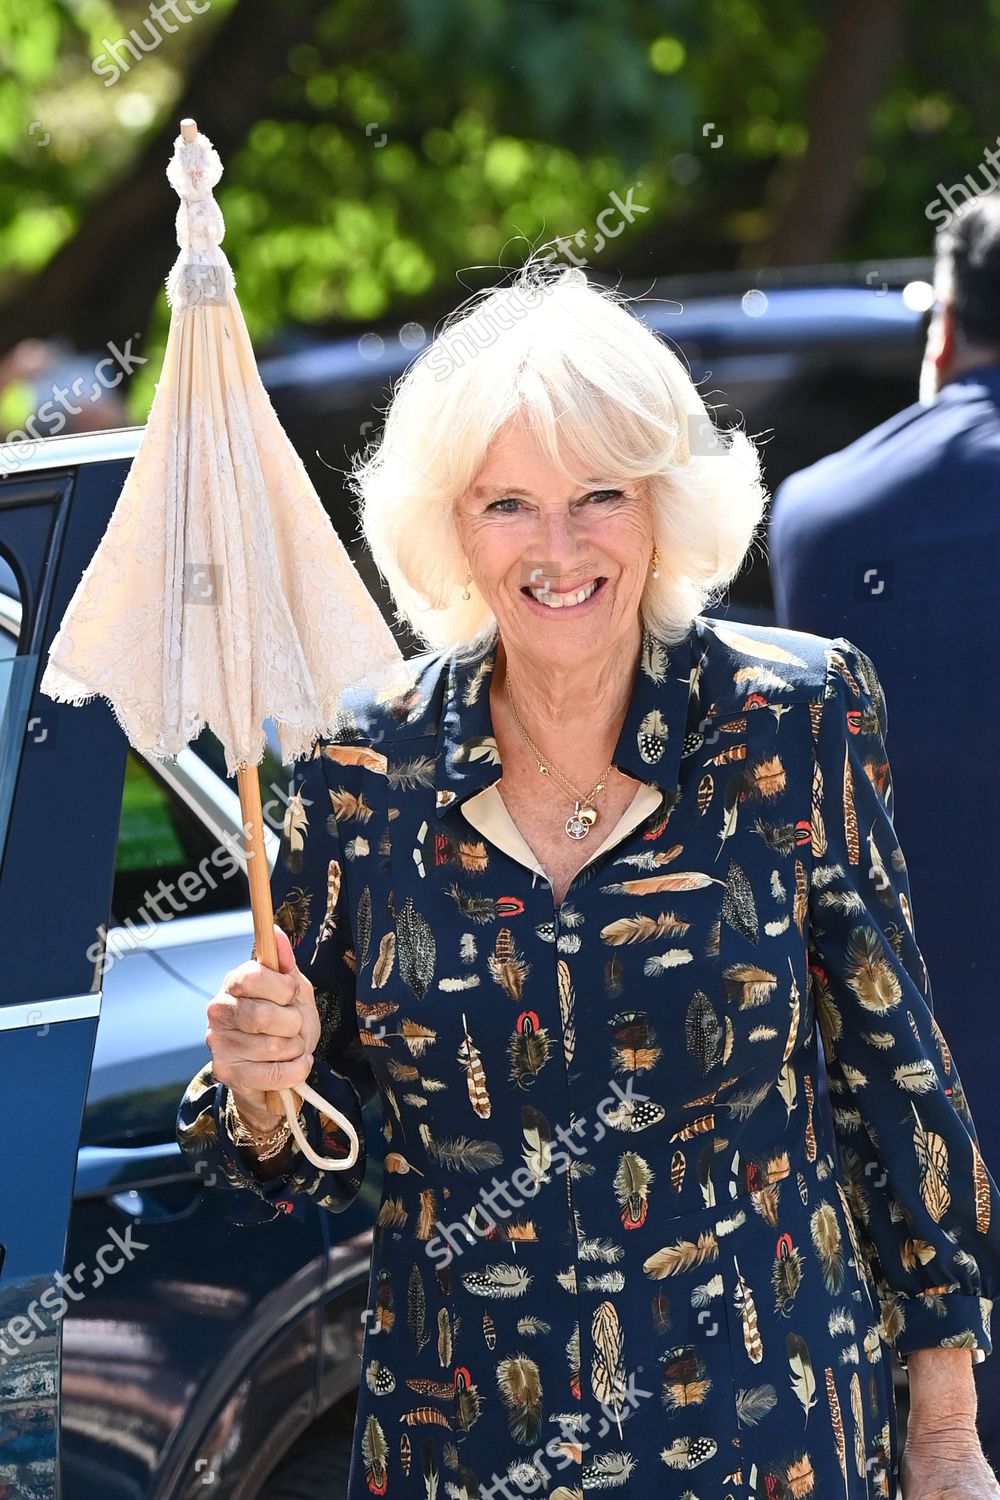 prince-charles-and-camilla-duchess-of-cornwall-visit-to-devon-and-cornwall-day-1-uk-shutterstock-editorial-12221468h.jpg